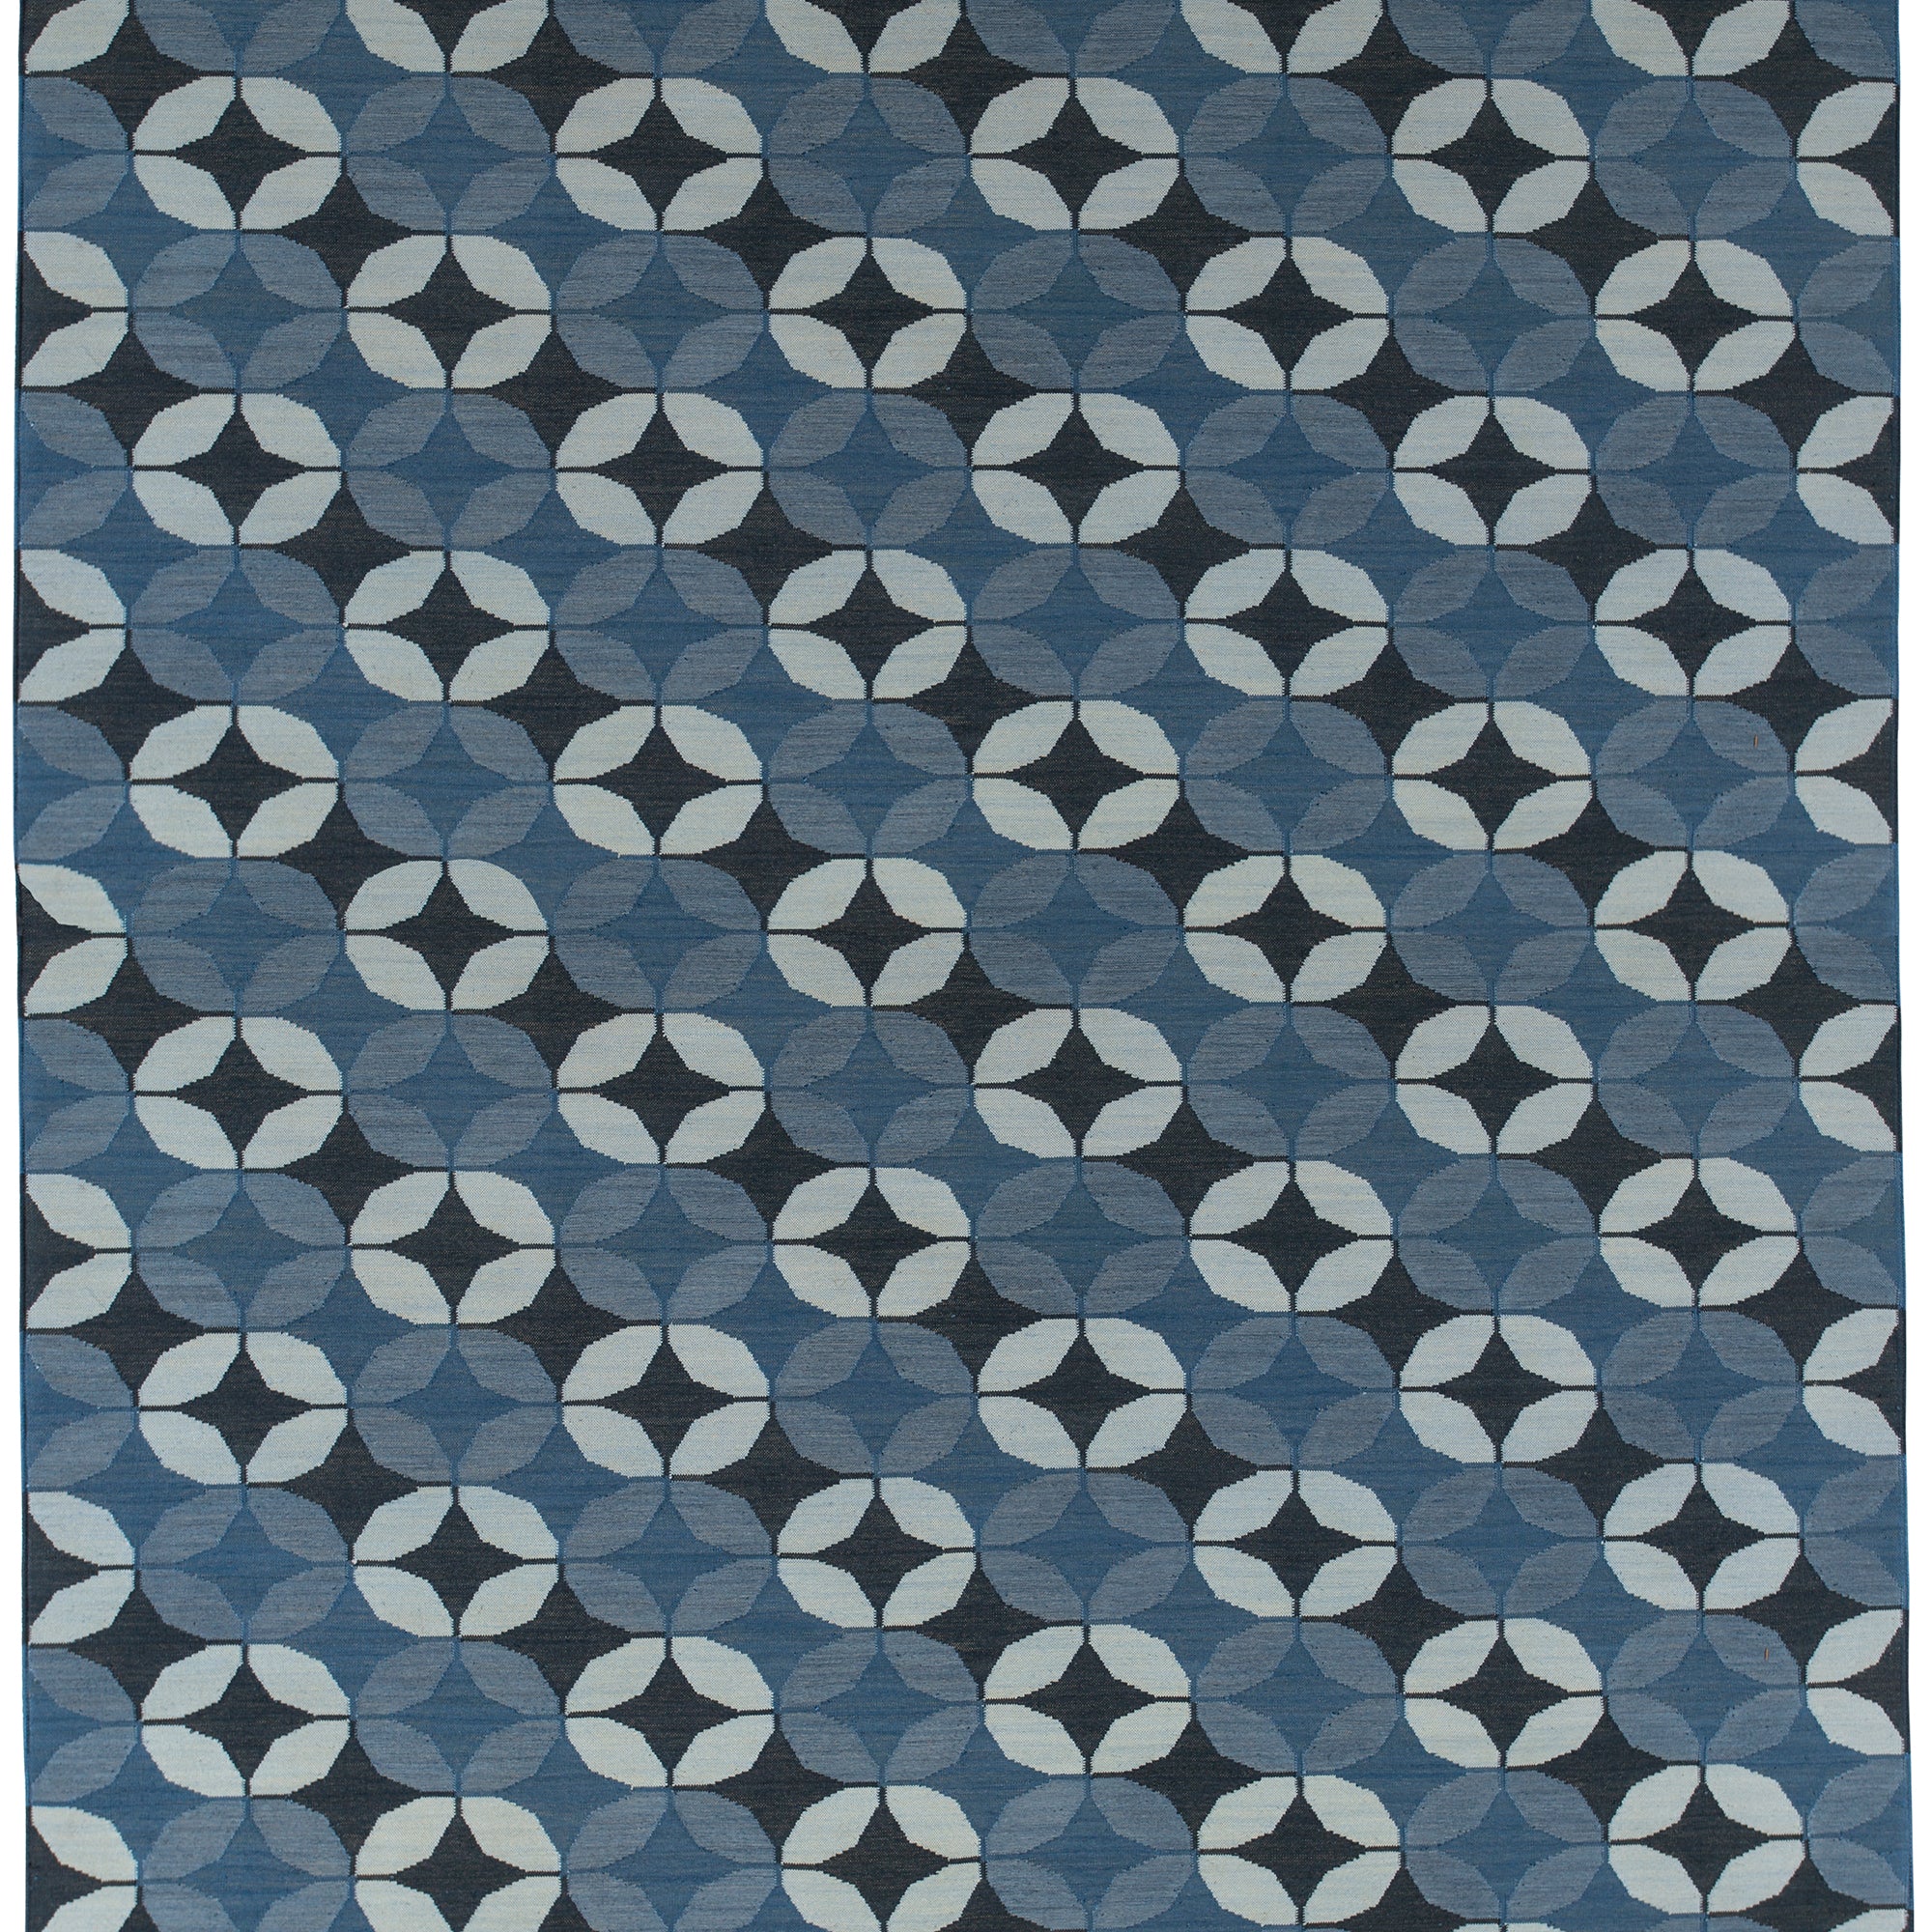 Full size Alhambra Rug featuring a pattern of linked circles that create a star like lattice in a range of blue shades, from pale blue to chambray, indigo, to dark navy